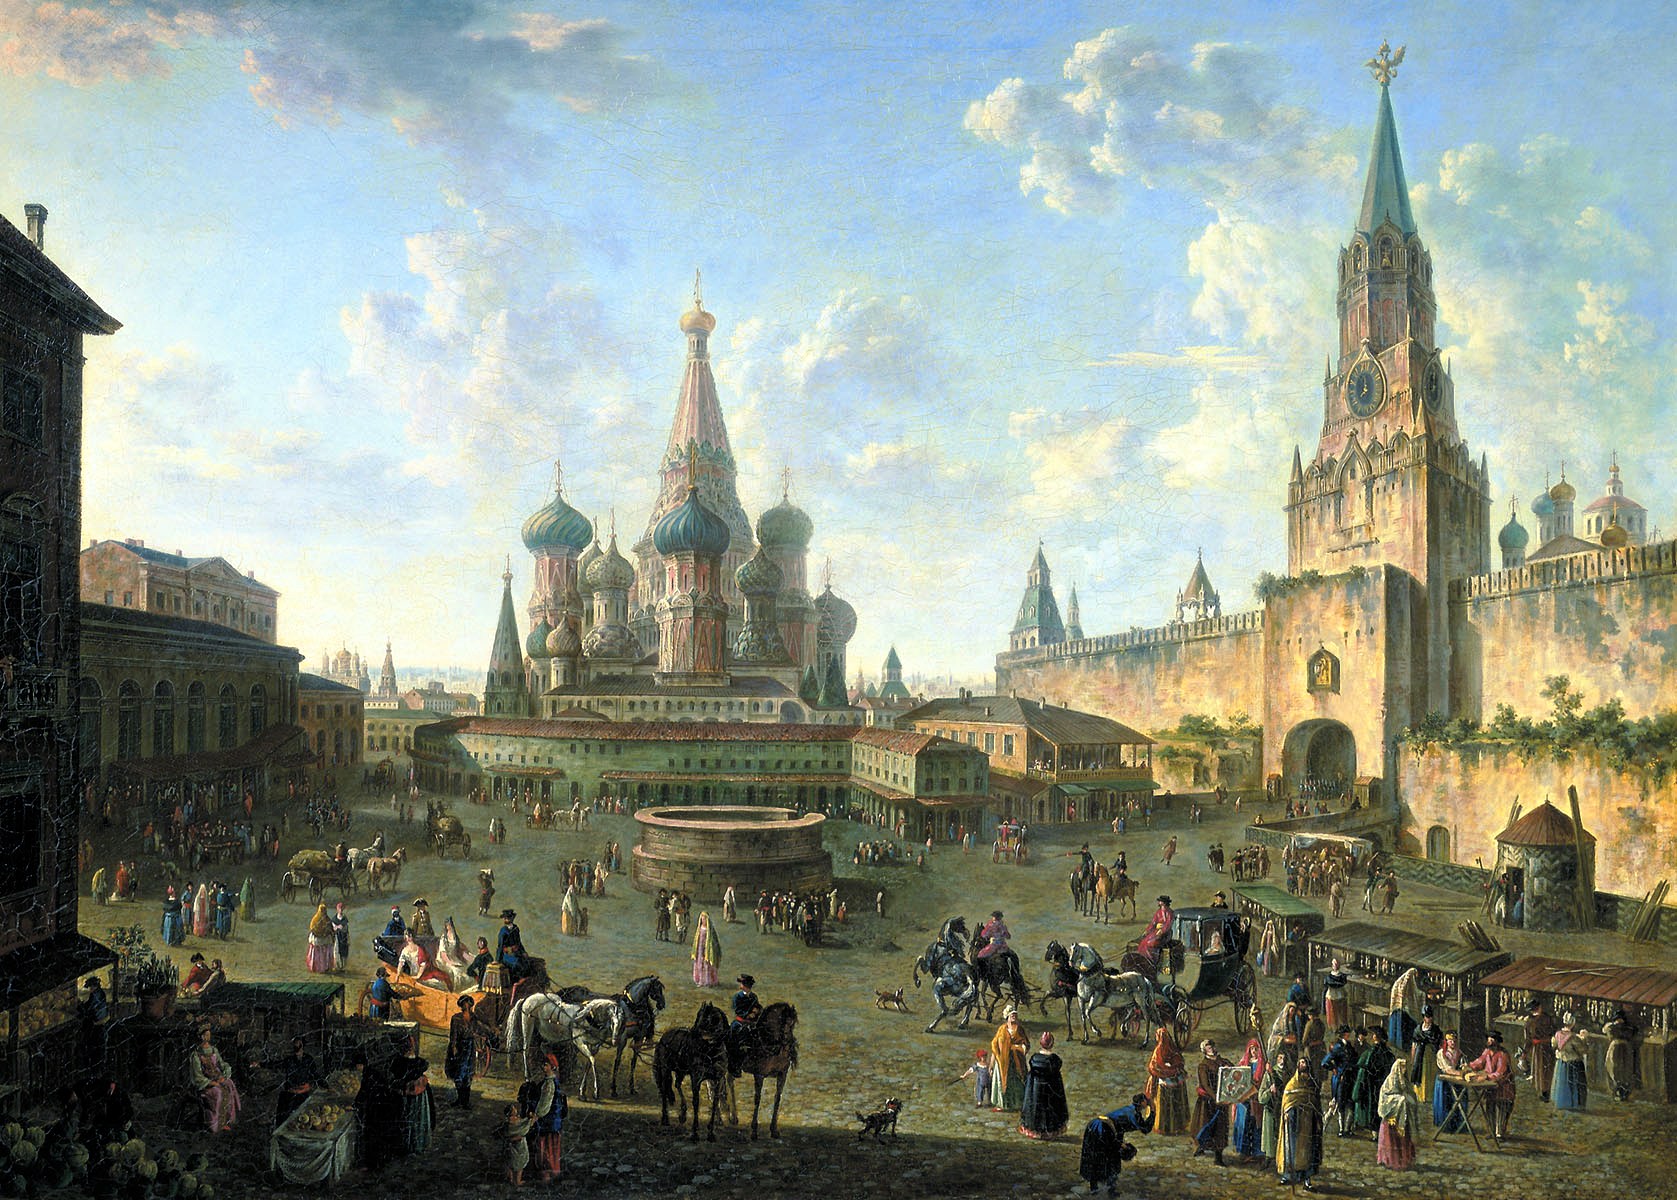 Fyodor Alekseyev, People, Crowds, Architecture, Building, Cityscape, City, Moscow, Red Square, Russia, Painting, Artwork, Horse, Old building, Classical art, Tower, Saint Basils Cathedral Wallpaper